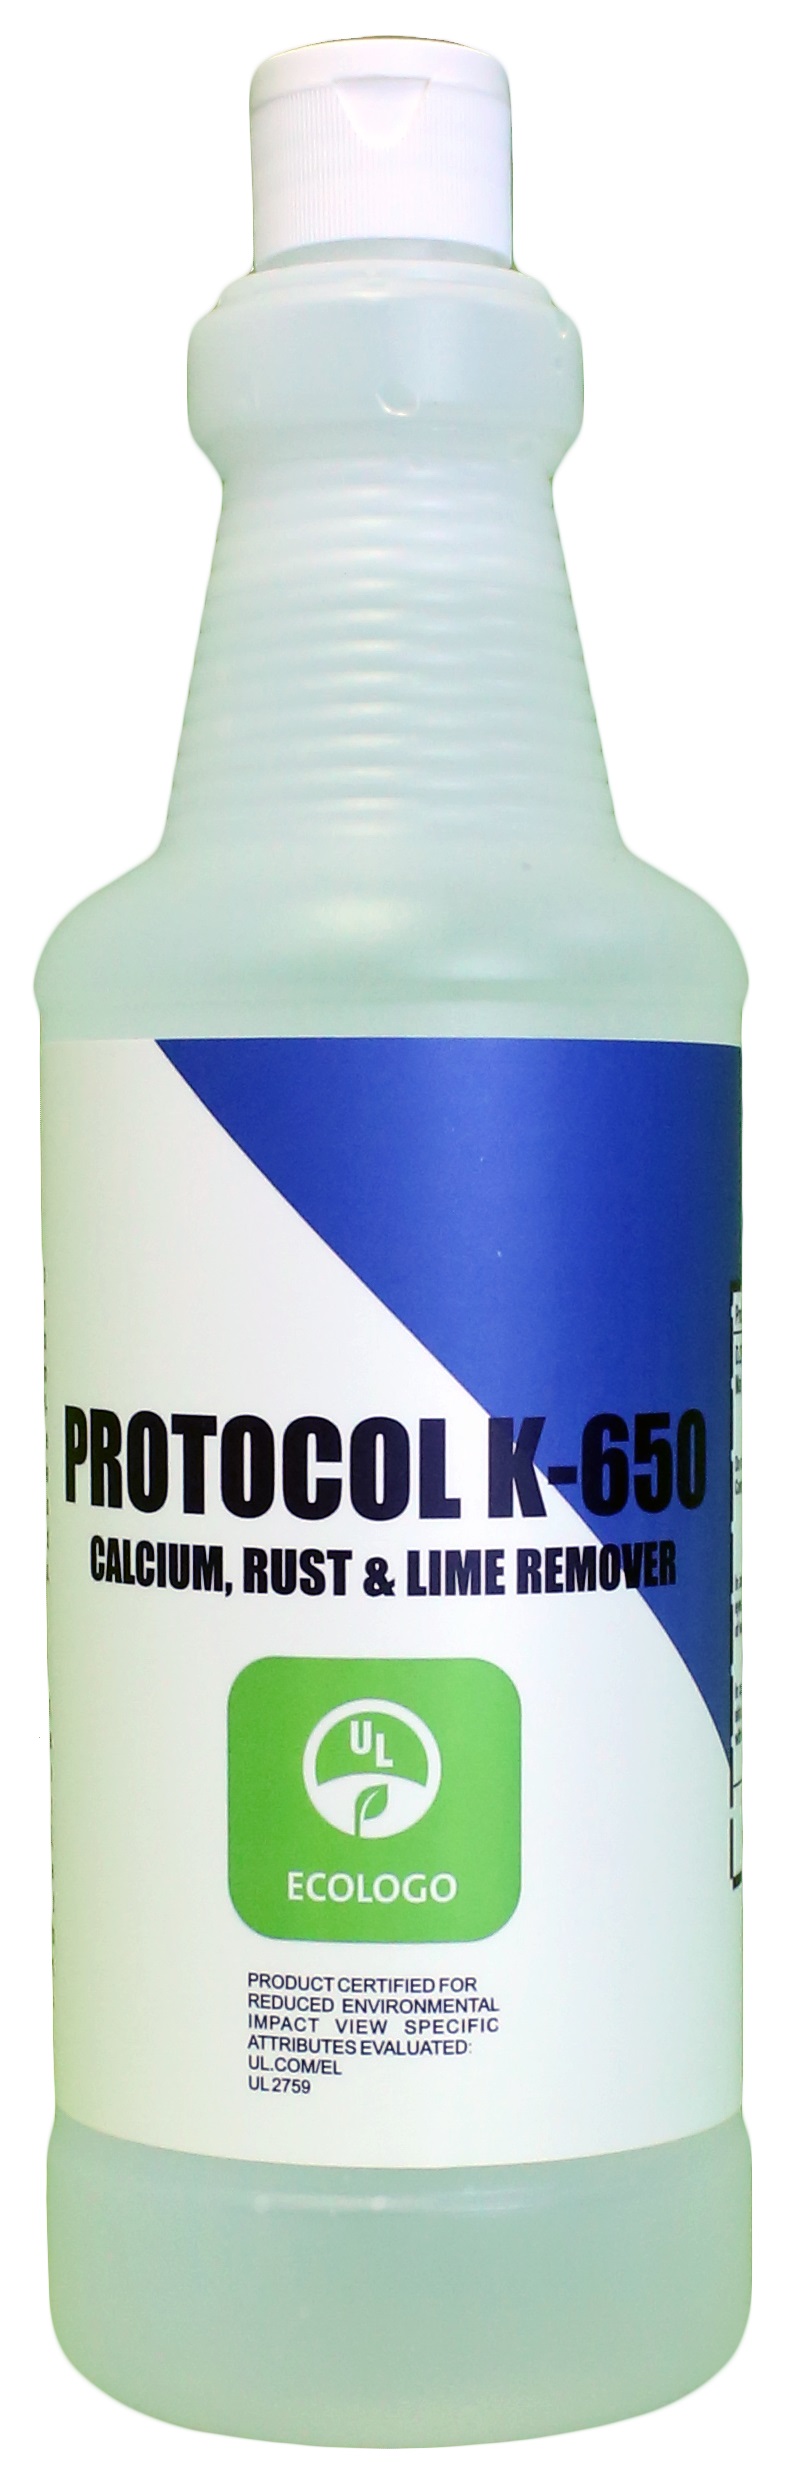 Protocol K650 UL Eco Certified Calcium,Lime,Rust Remover - 1 Litre